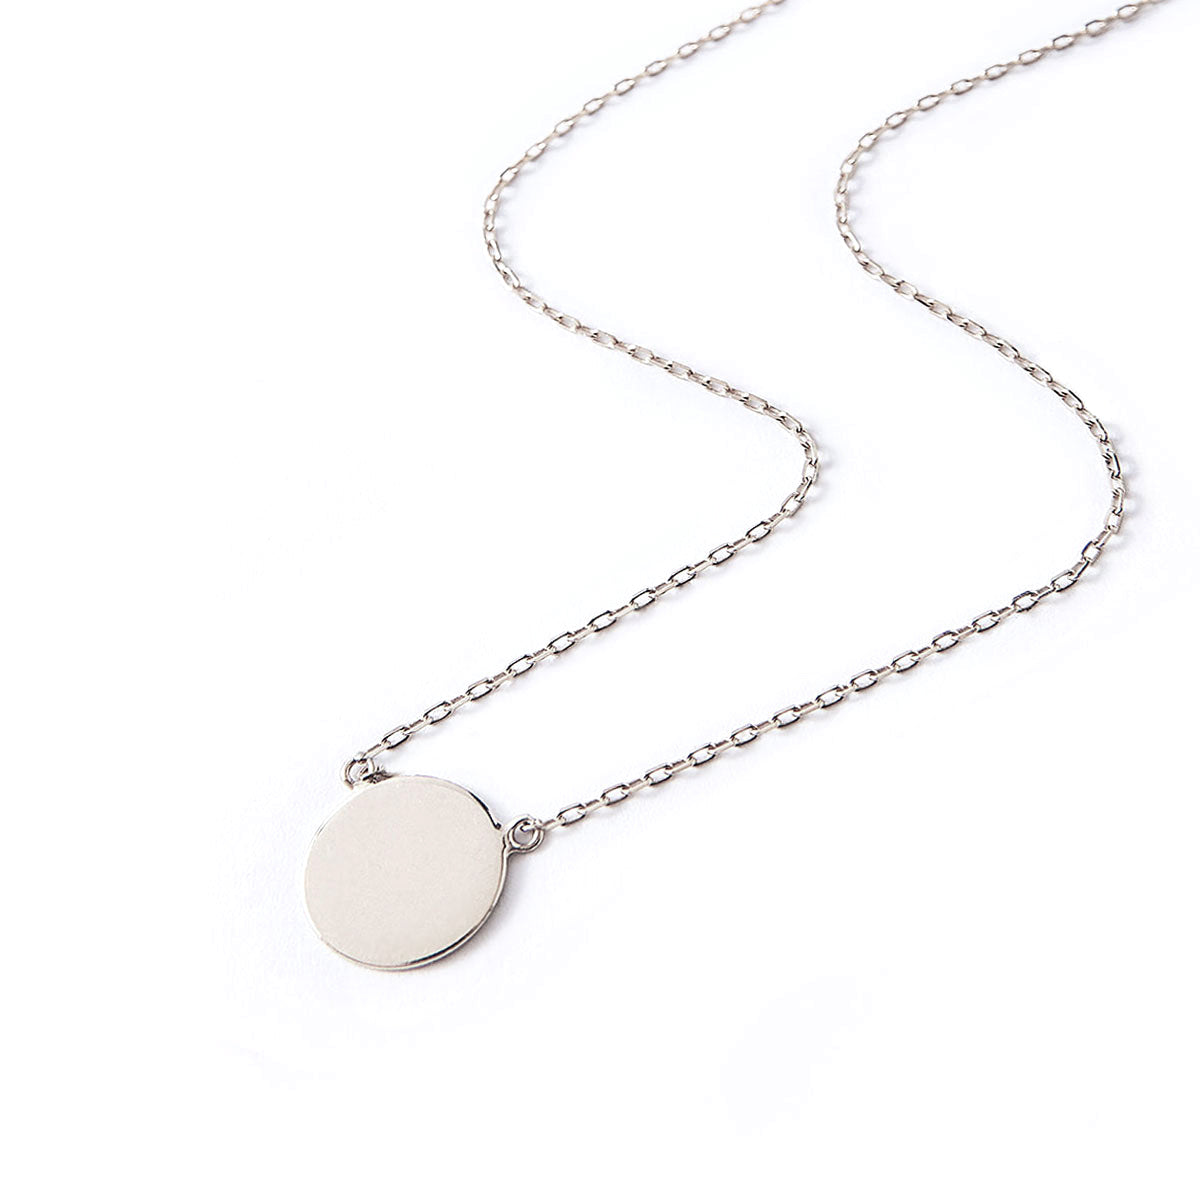 Small Sterling Silver Circle Disc Pendant Necklace